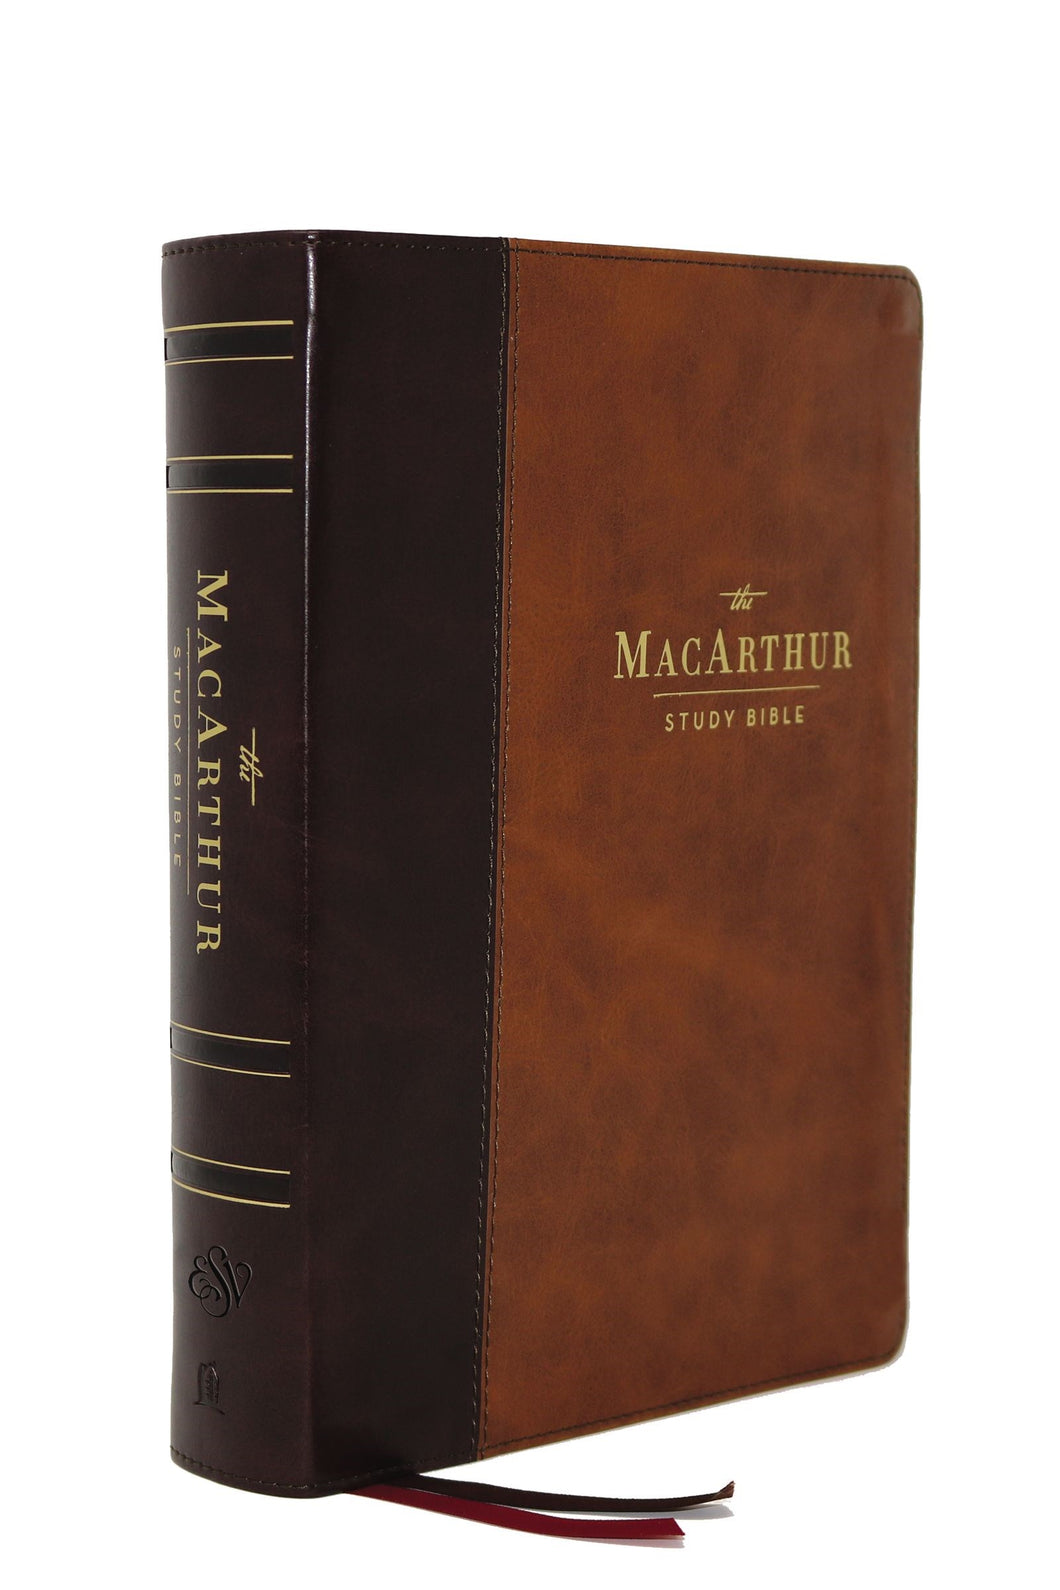 ESV MacArthur Study Bible (2nd Edition)-Brown Leathersoft